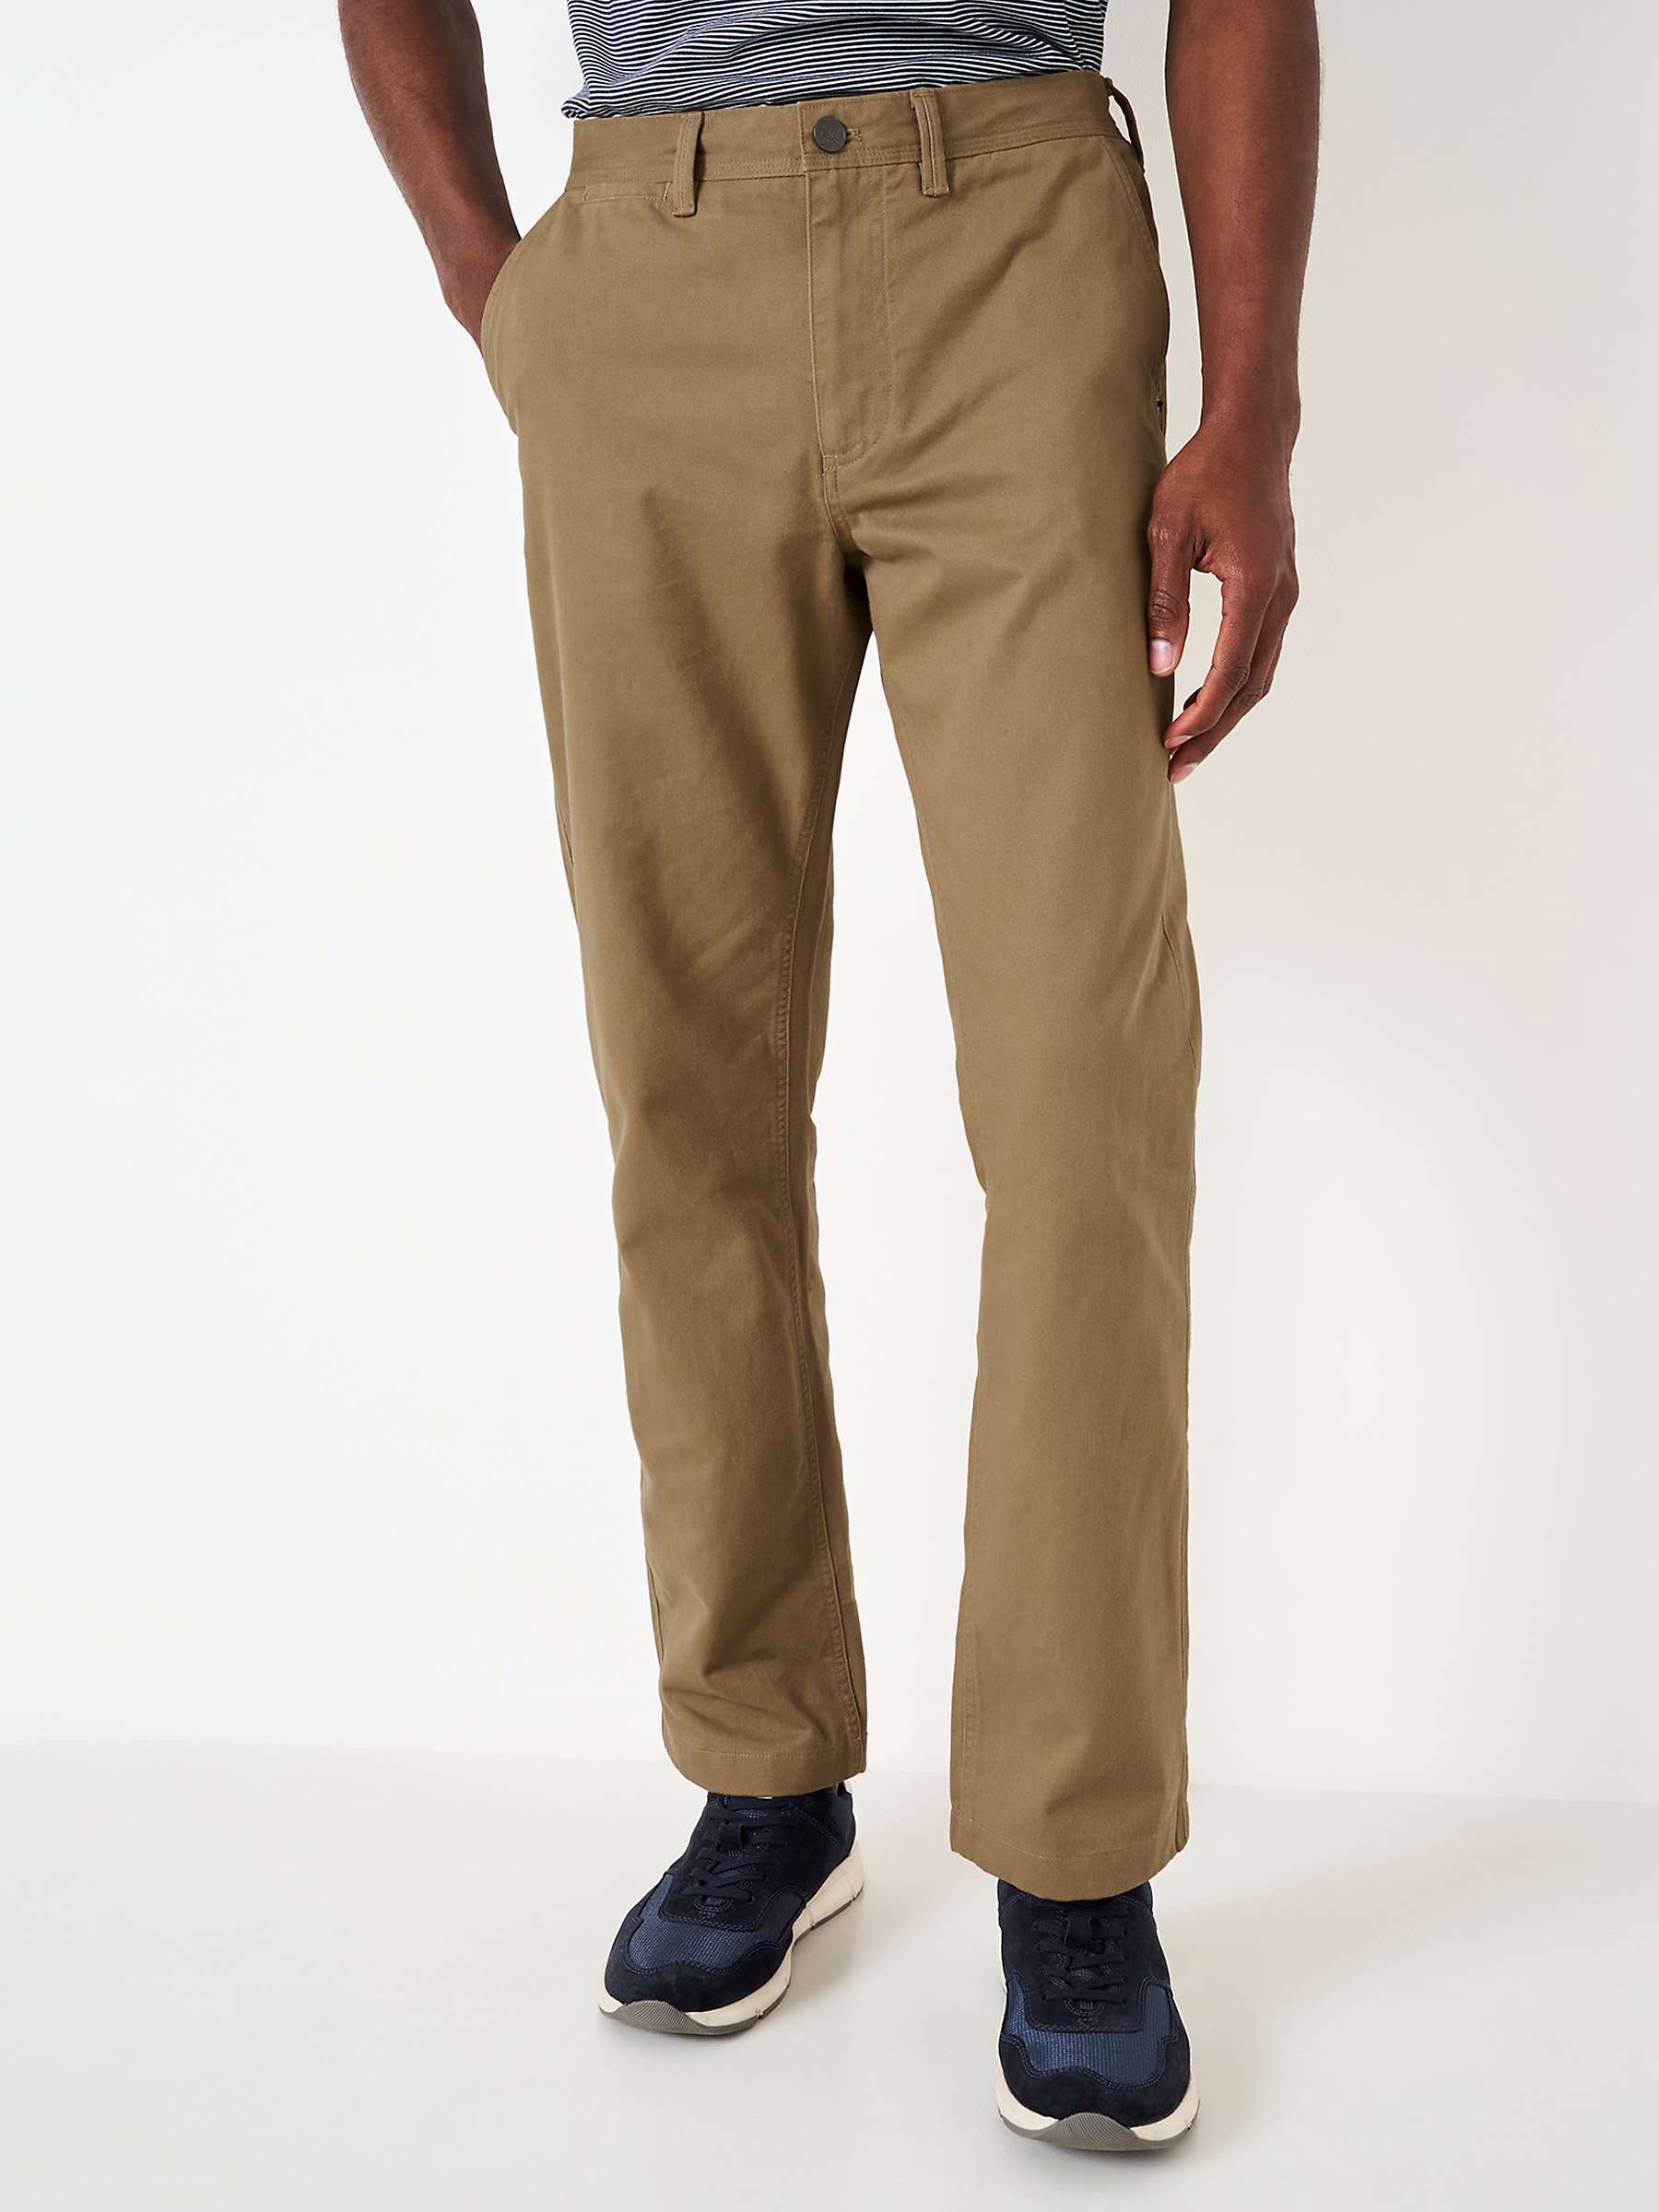 Crew Clothing Cotton Vint Chinos, Taupe at John Lewis & Partners